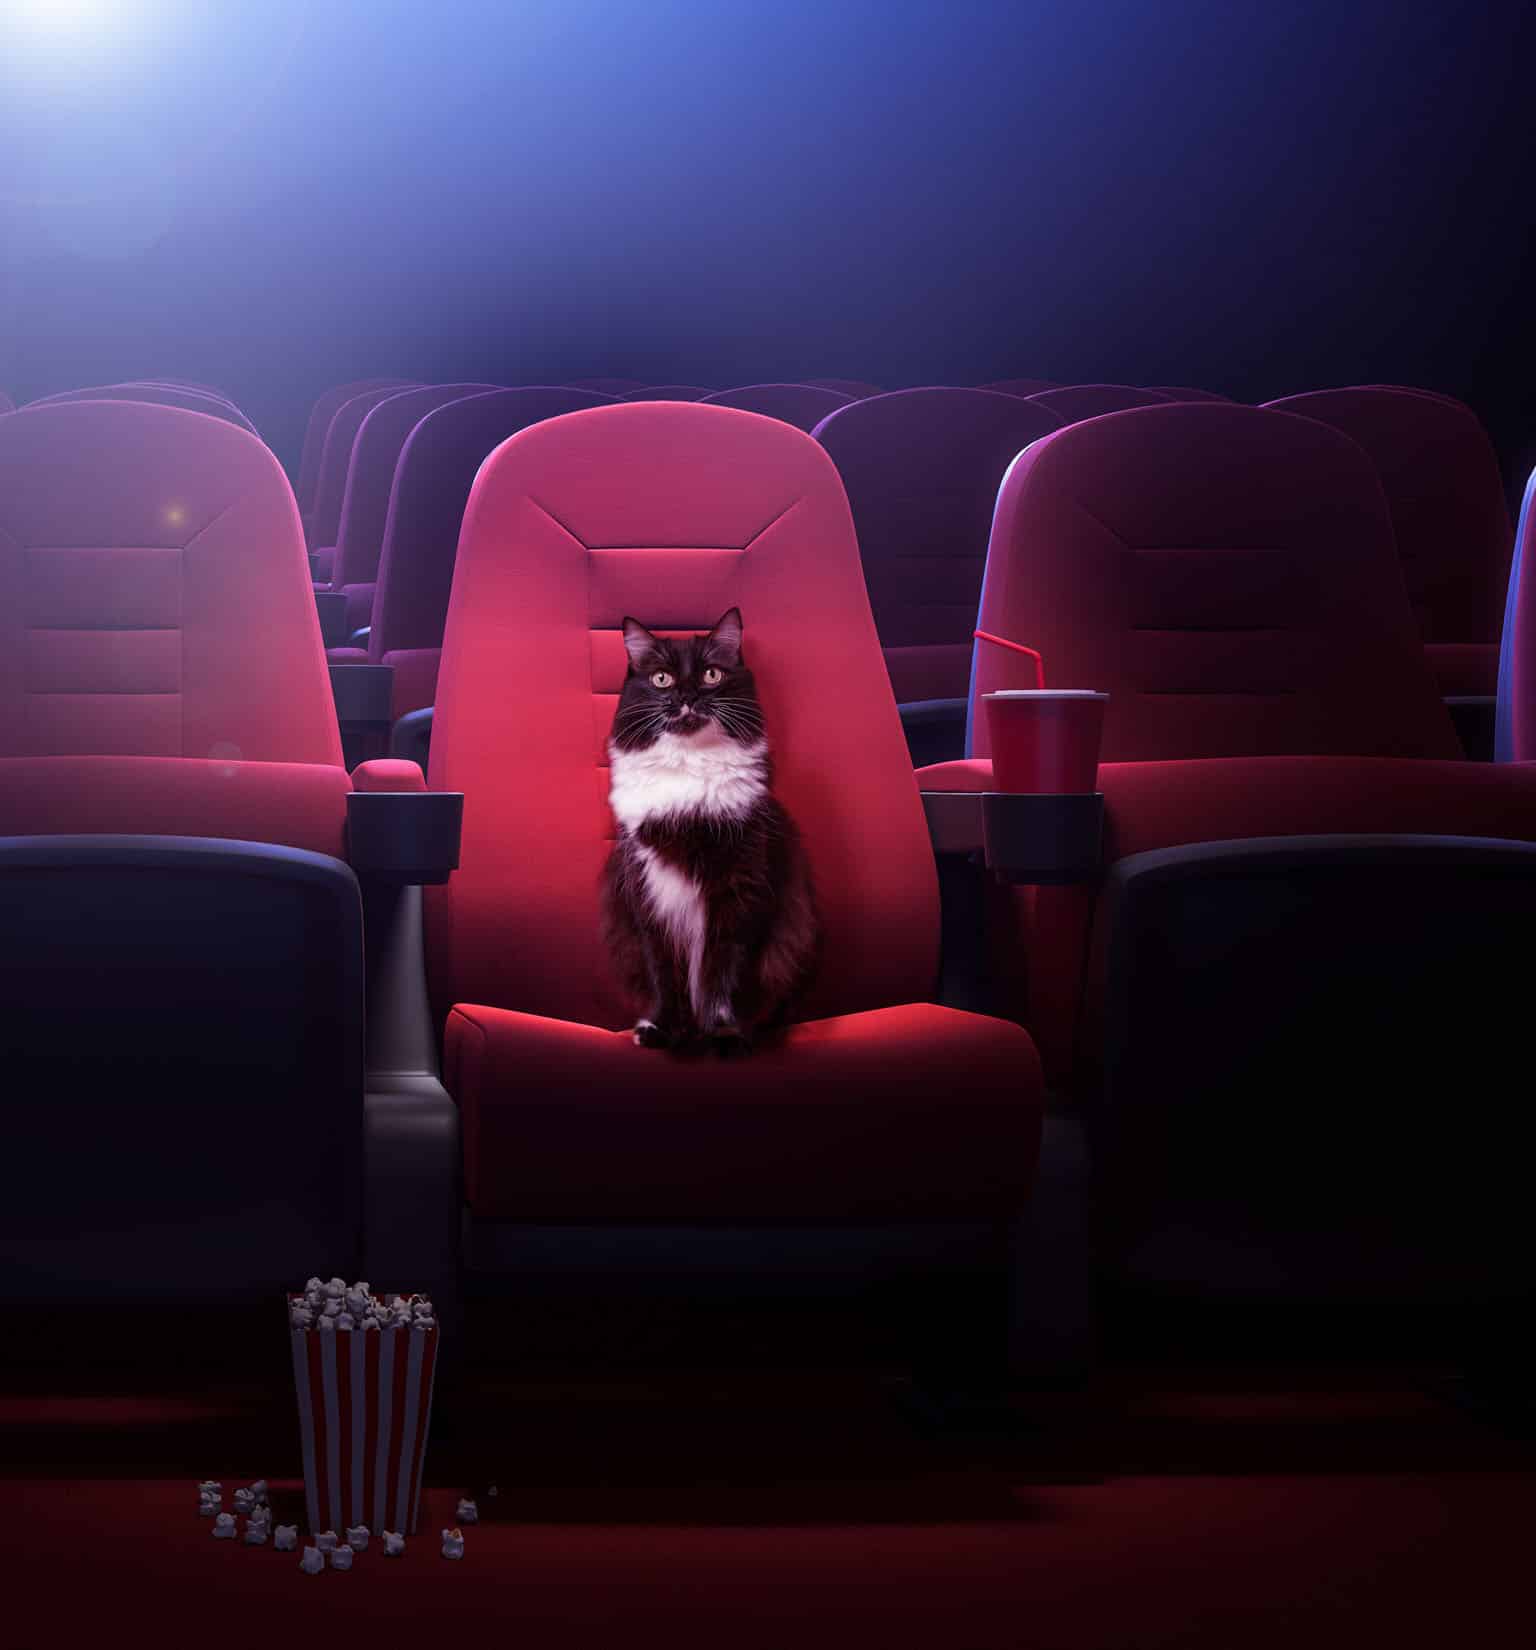 Cats in movies